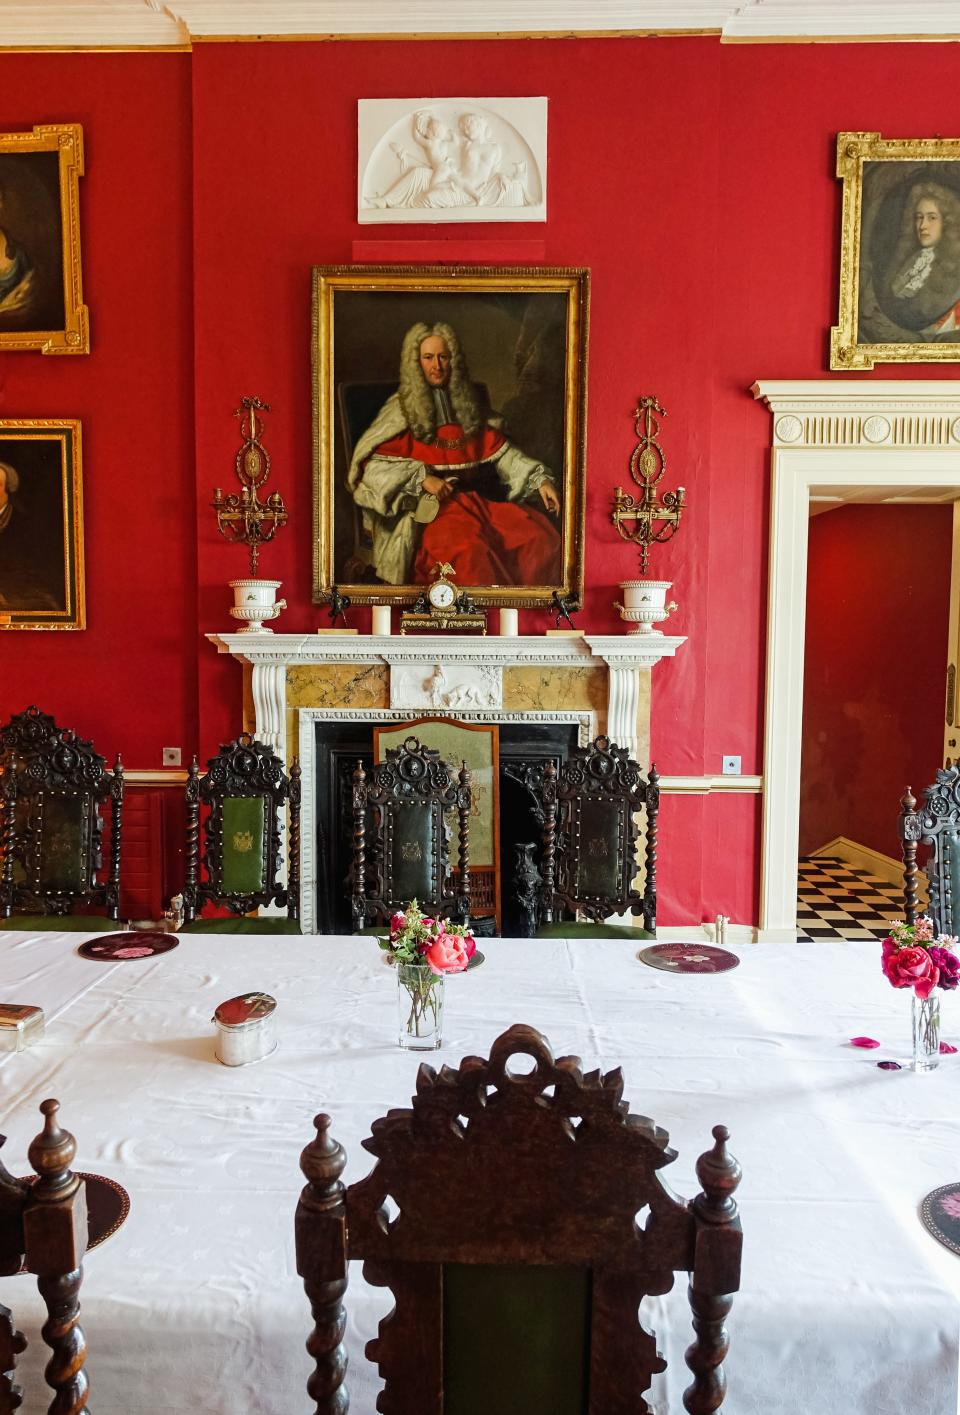 The dining room is covered with family portraits dating back to the 1700s. The crimson-colored walls add to the drama created by the dark-wood, Baronial-style furniture that was made for the house in the 19th century. “That heavy, black pseudo-Jacobean-style furniture was a new fashion at the beginning of the 19th century,” notes Fitzgerald.